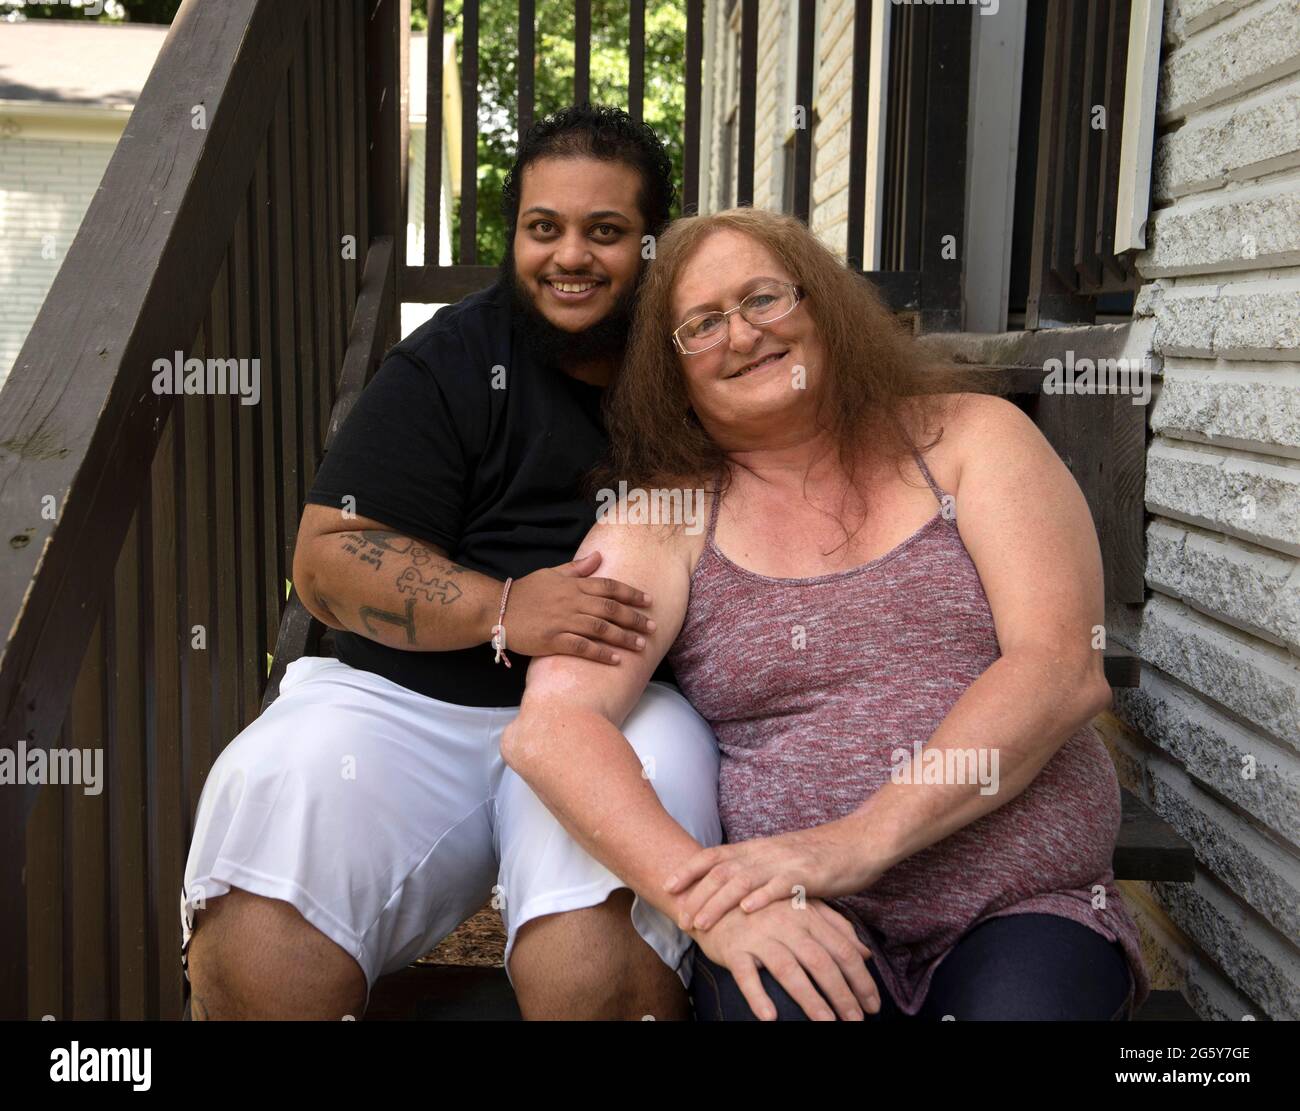 Conley, Georgia, USA. 29th June, 2021. JAMIL-JACK ABREAU and wife LUPA BRANDT are a married transgender couple in Atlanta who direct the non-profit Phoenix Transition Program for transgender individuals coming out of incarceration. Abreau, 38, born in Miami, Florida from Afro-Cuban and Afro-Puerto Rican parents, transitioned from female to male when he was 17. His wife Lupa, 59, is a U.S. Army military intelligence officer and now lives in her true gender. She was in the prison system for 33 years. The couple help transgender and gender non-conforming prisoners leaving the prison system with C Stock Photo